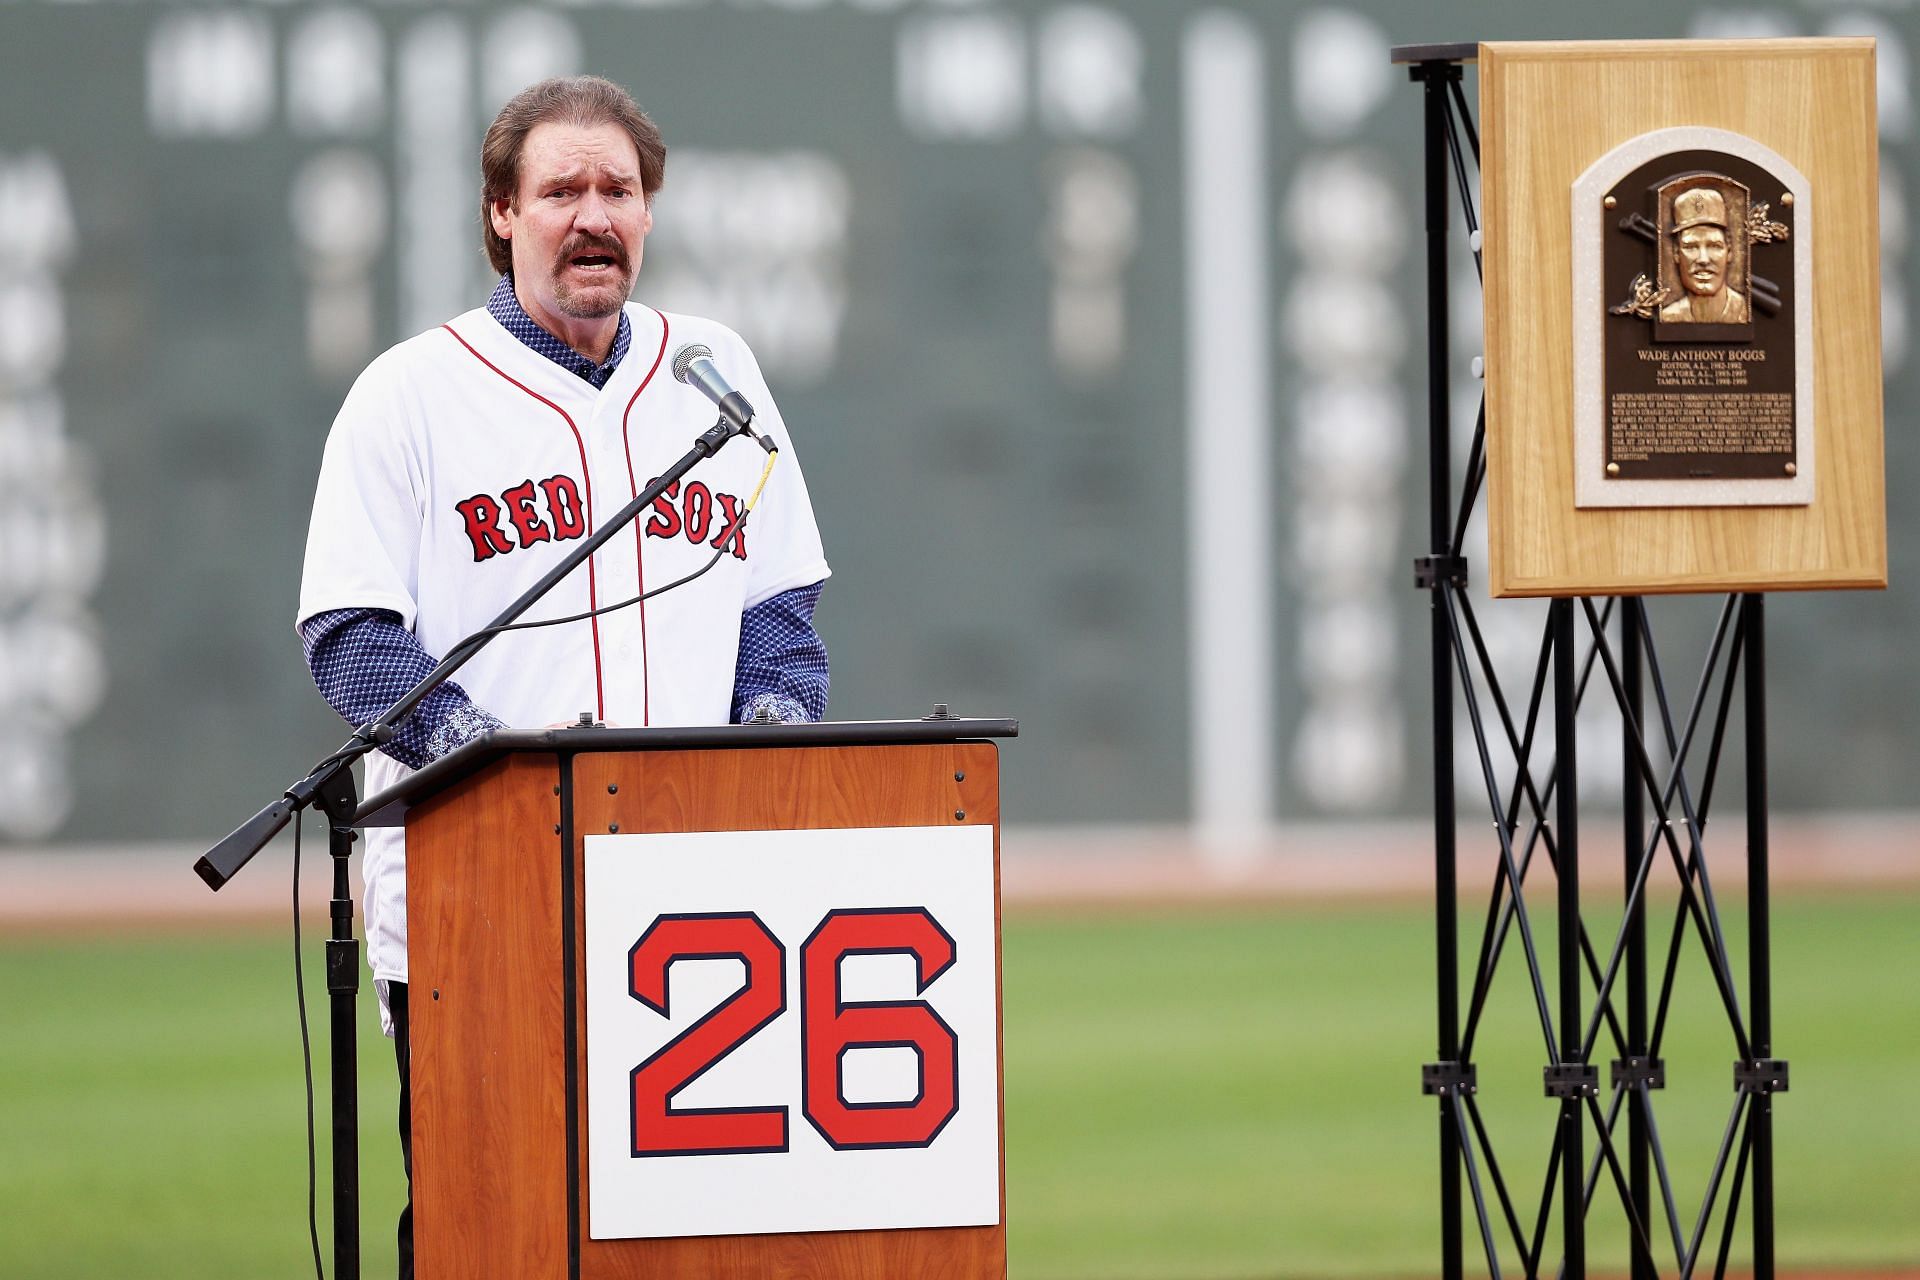 Wade Boggs talks baseball during his recent trip to Berks County